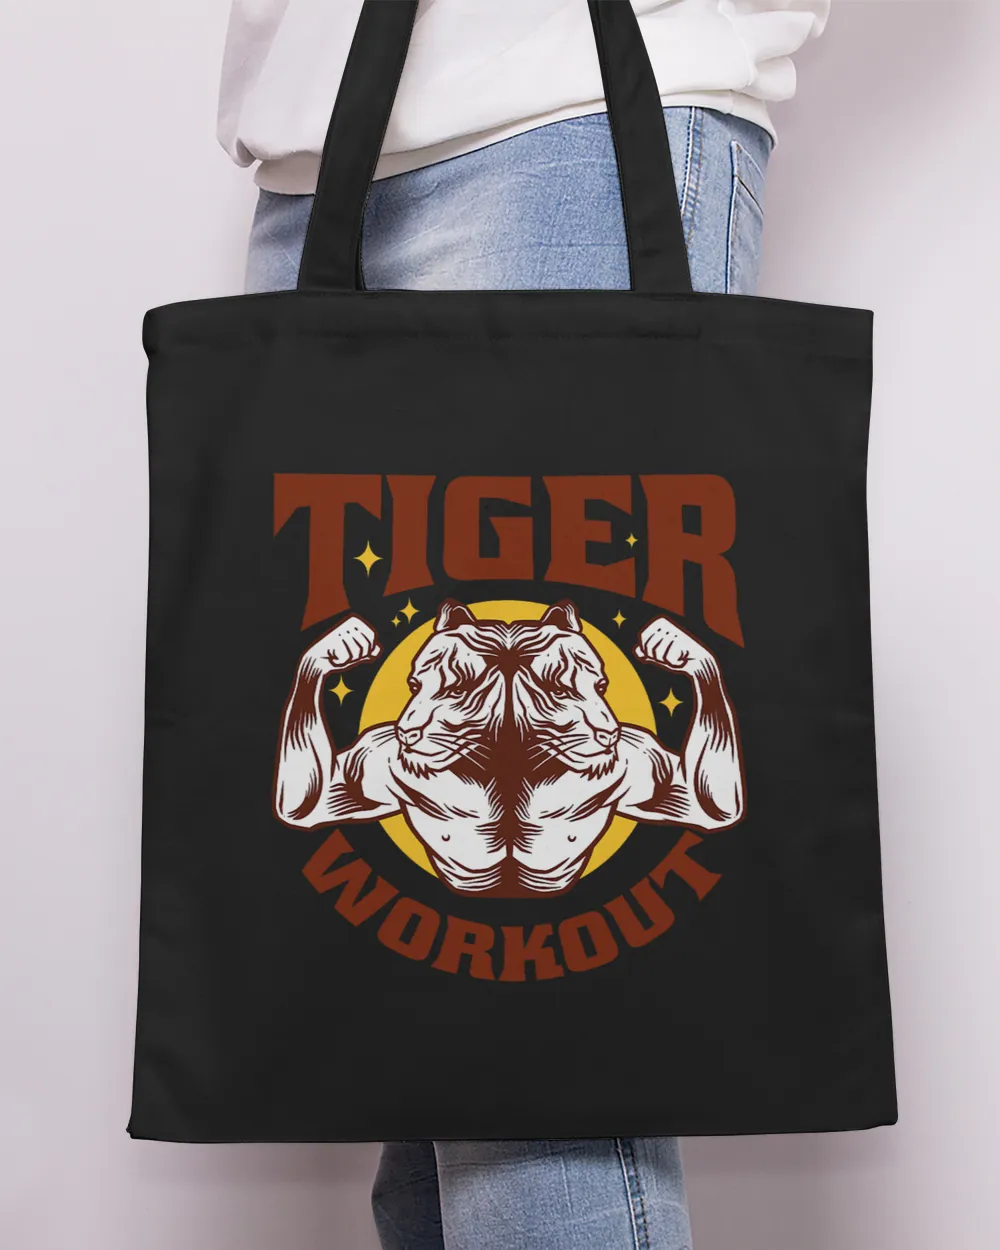 Tiger Gift Workout Gym Person Work Out Expert Weightlifter